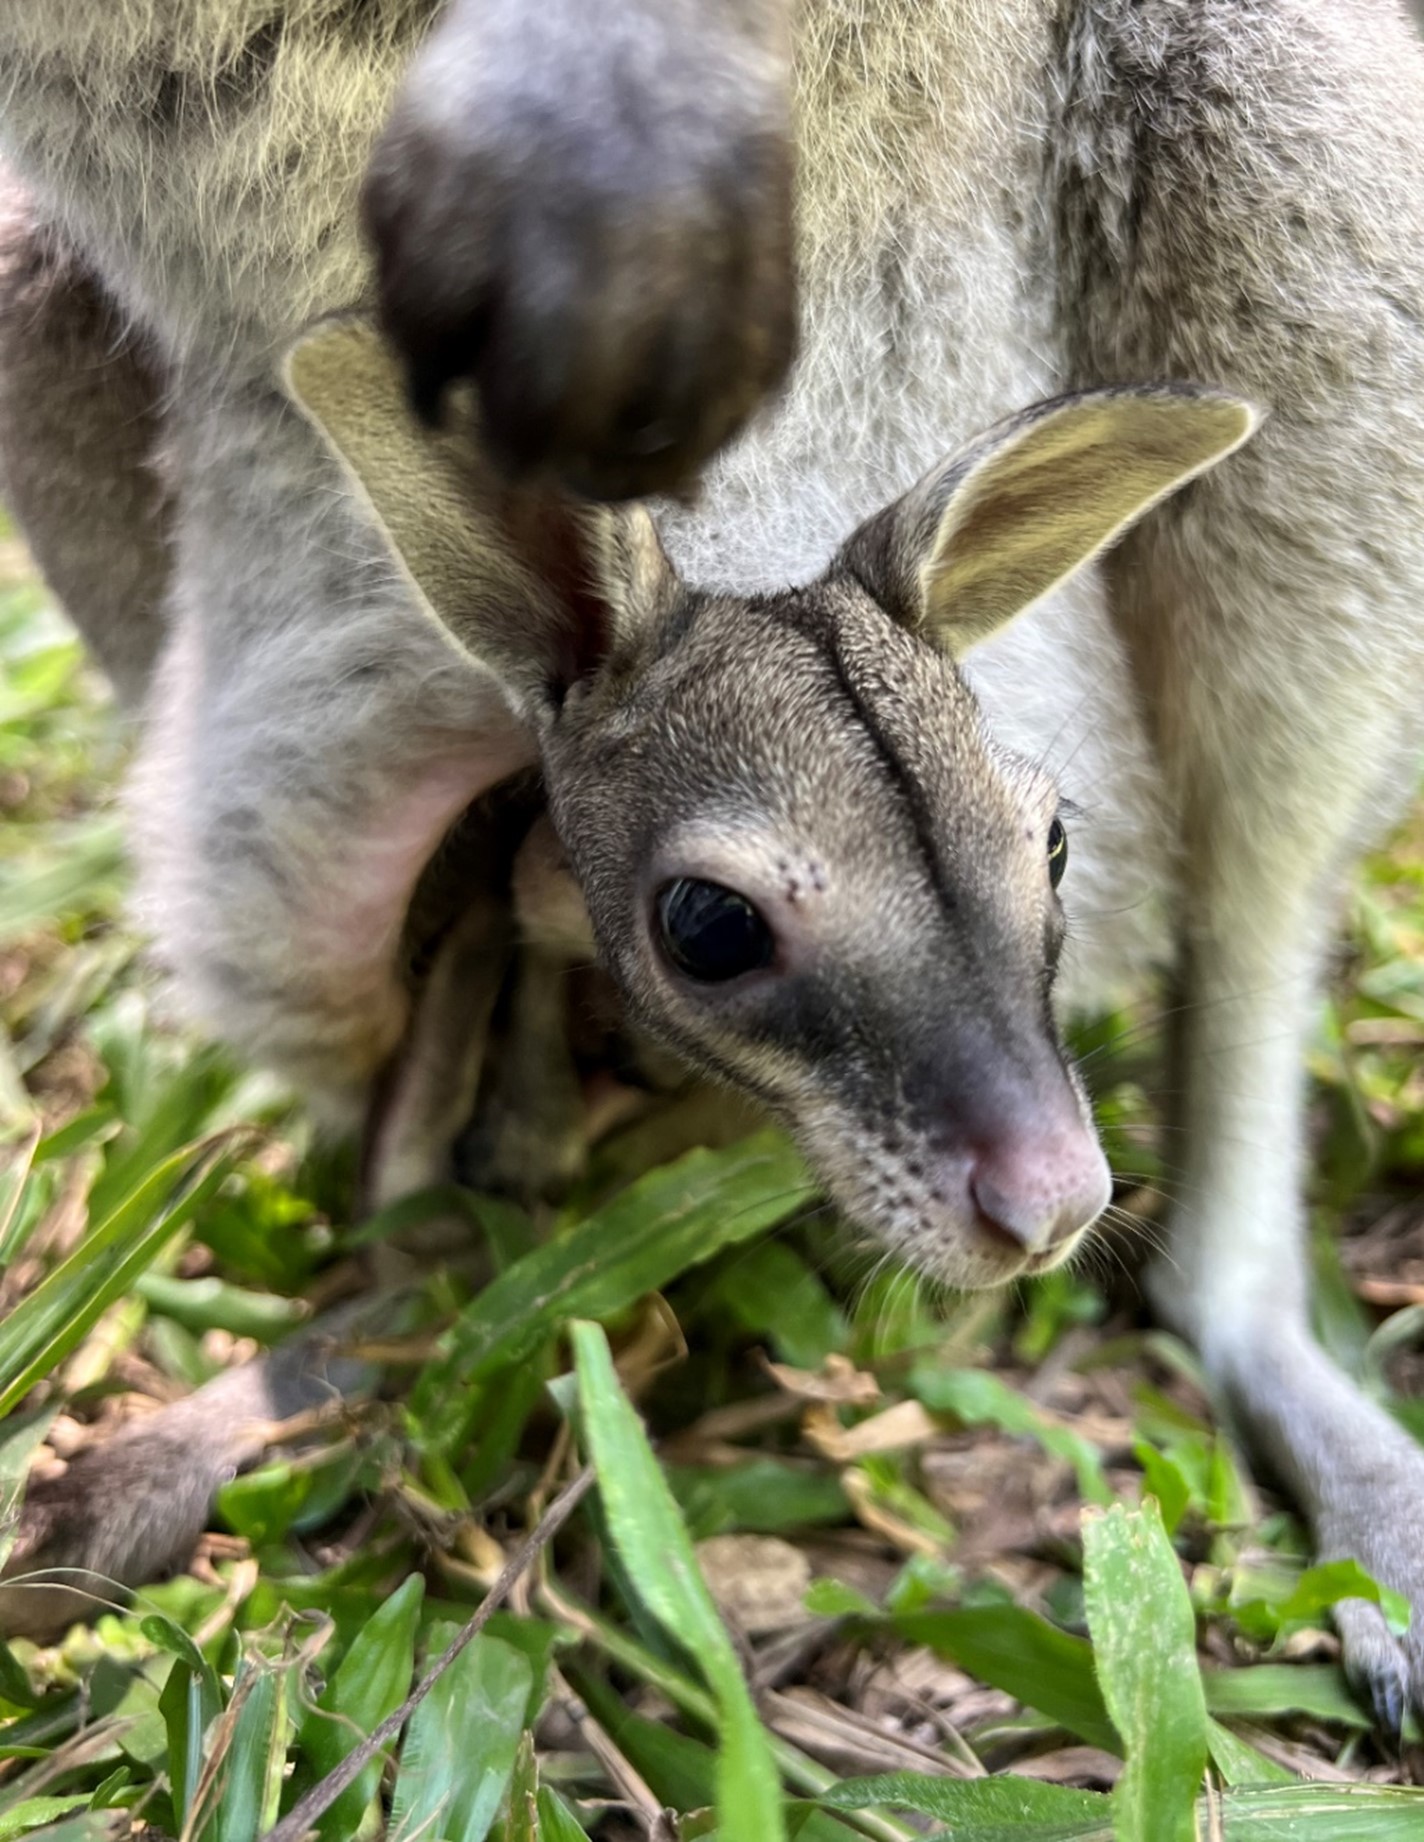 The three joeys started to emerge from their mothers' pouches last month.